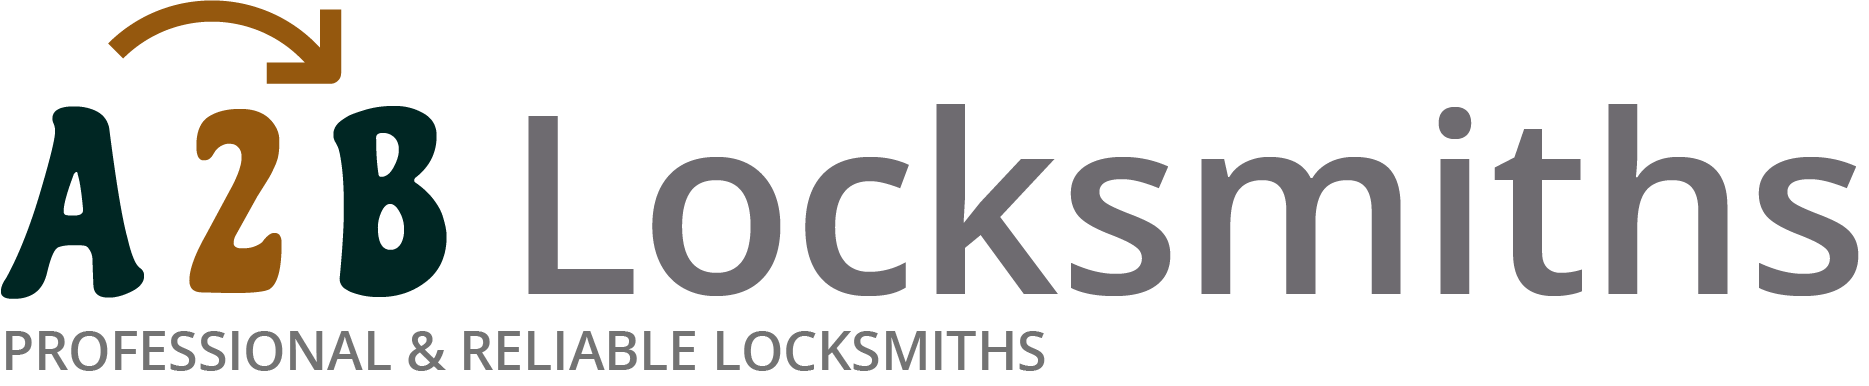 If you are locked out of house in Dagenham, our 24/7 local emergency locksmith services can help you.